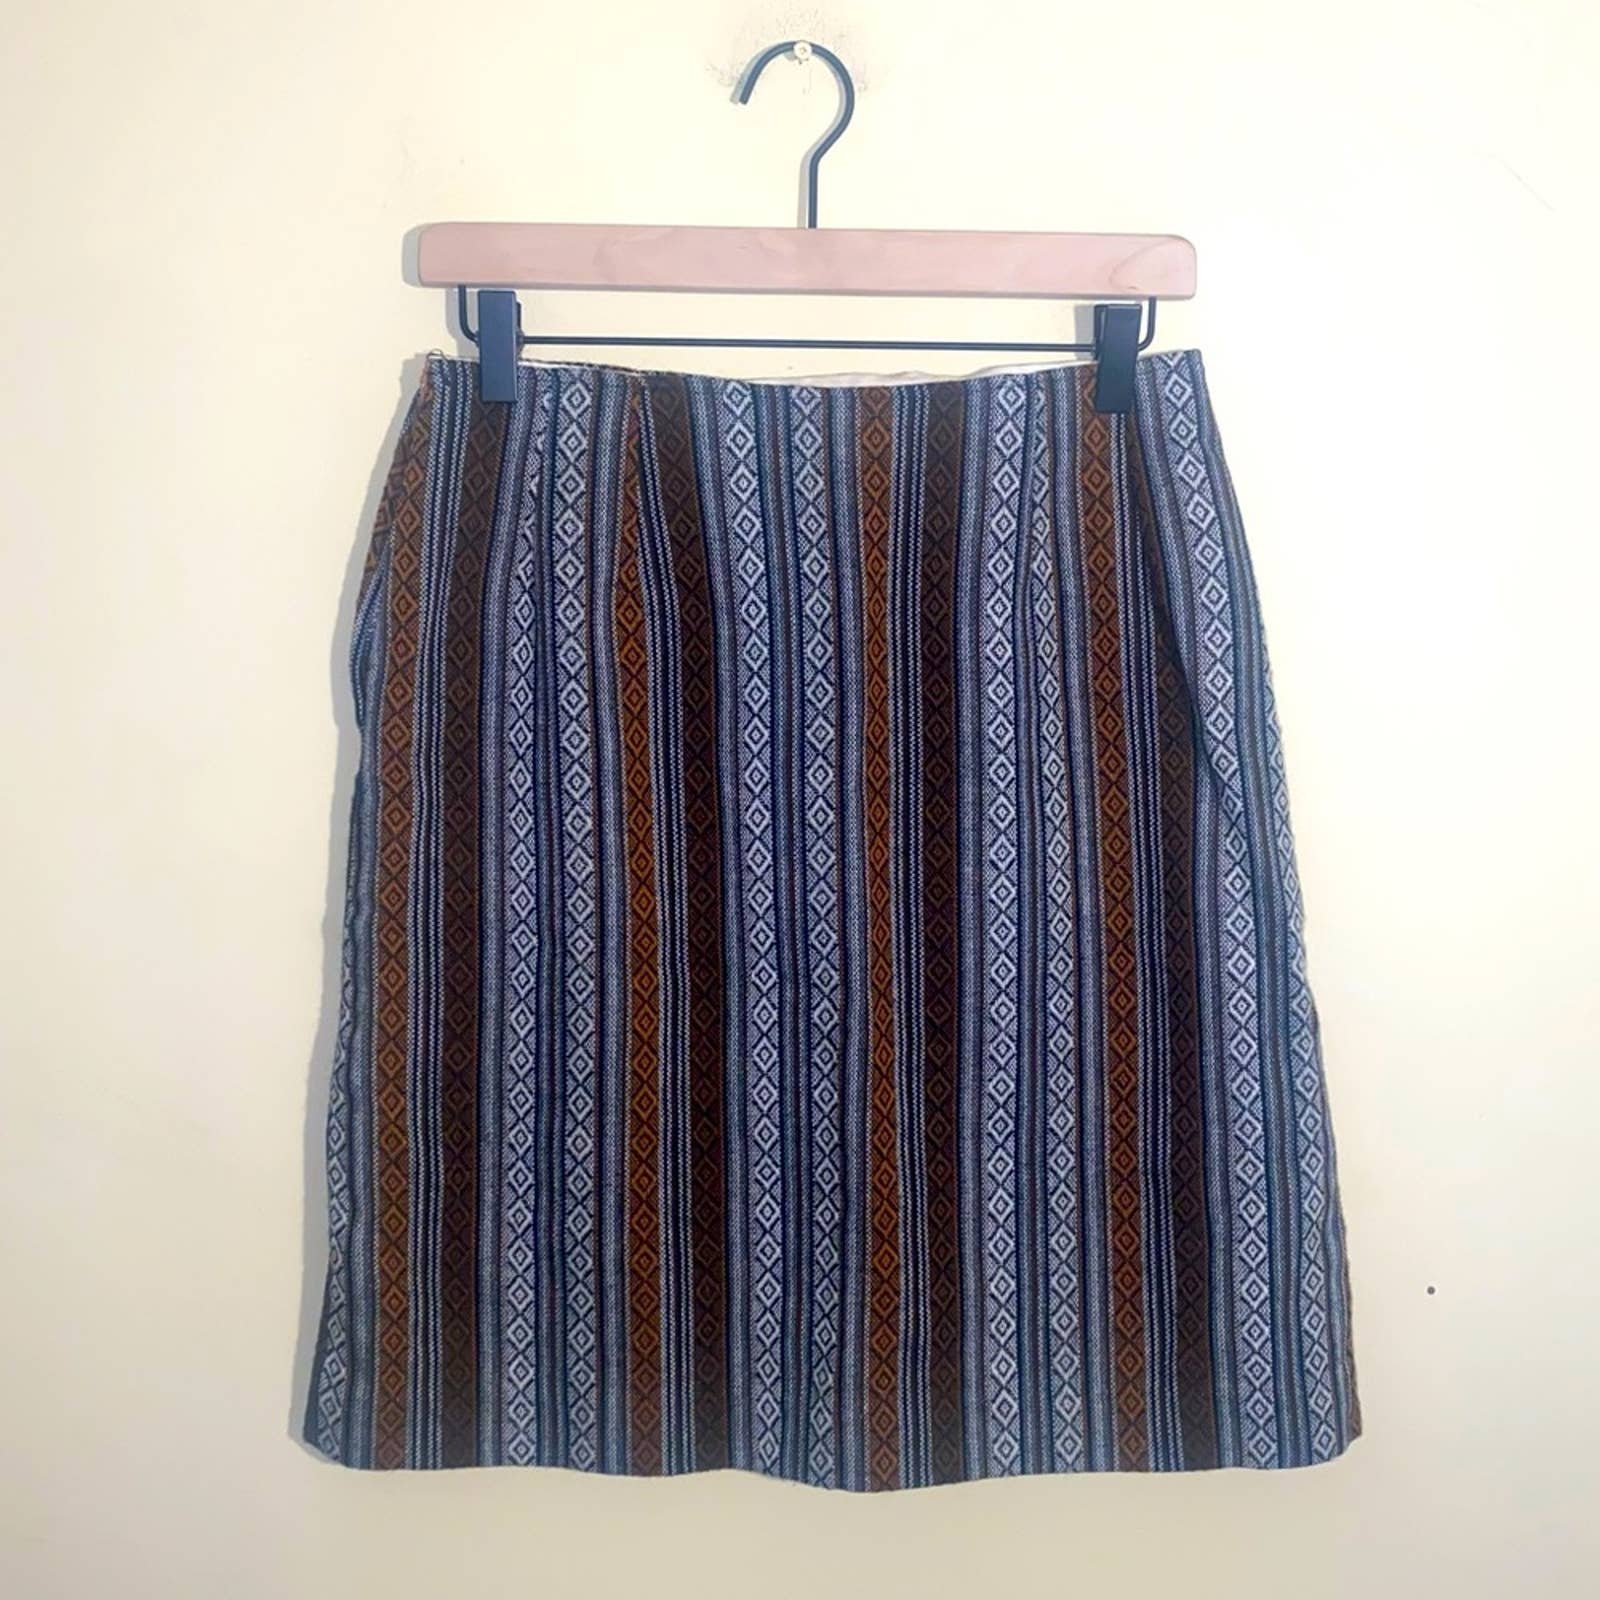 Exclusive VNTG 70s mod handmade patterned skirt fOWE6nP